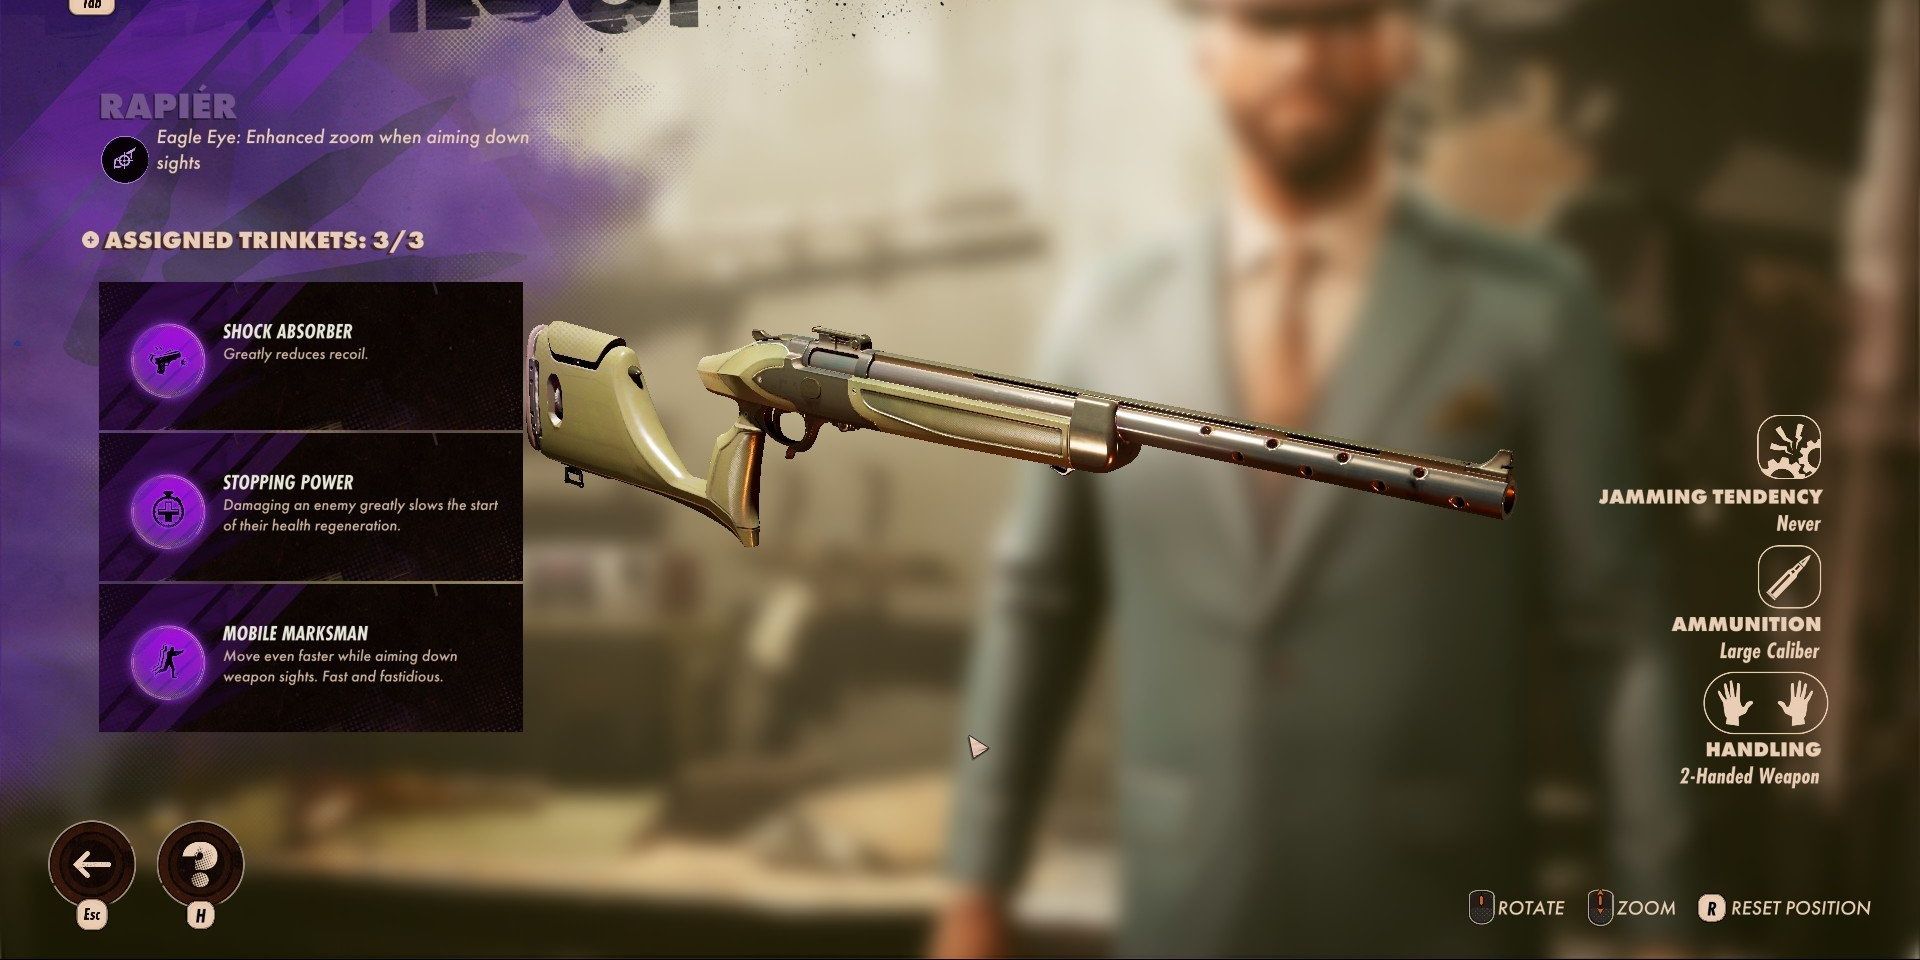 Screenshot of the Stopping Power trinket in Deathloop with a Rapier gun in the center of the screen